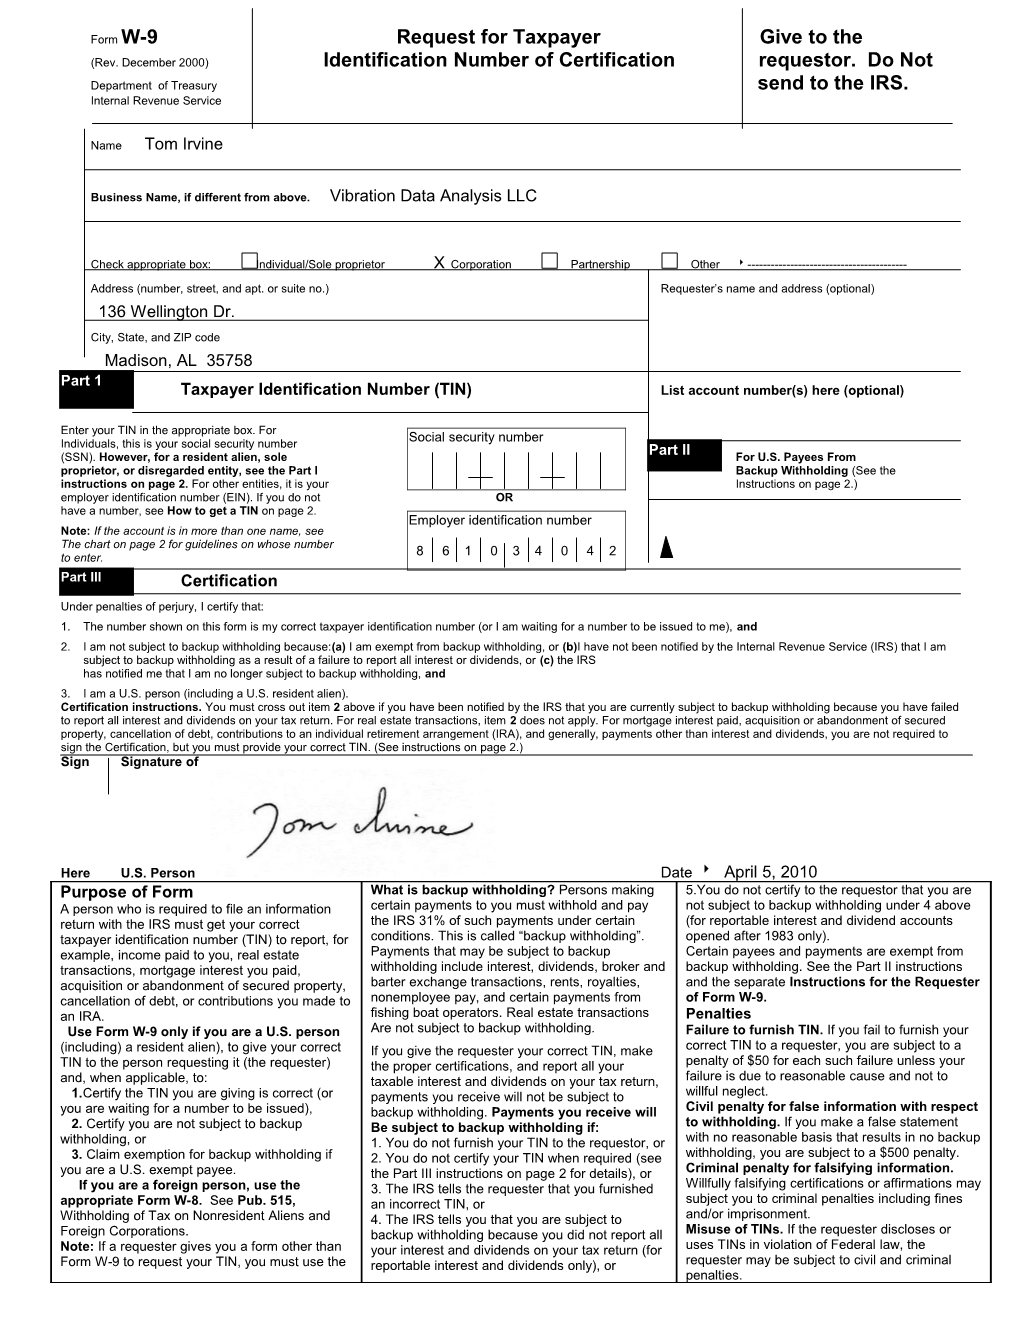 Form W-9 Request for Taxpayer